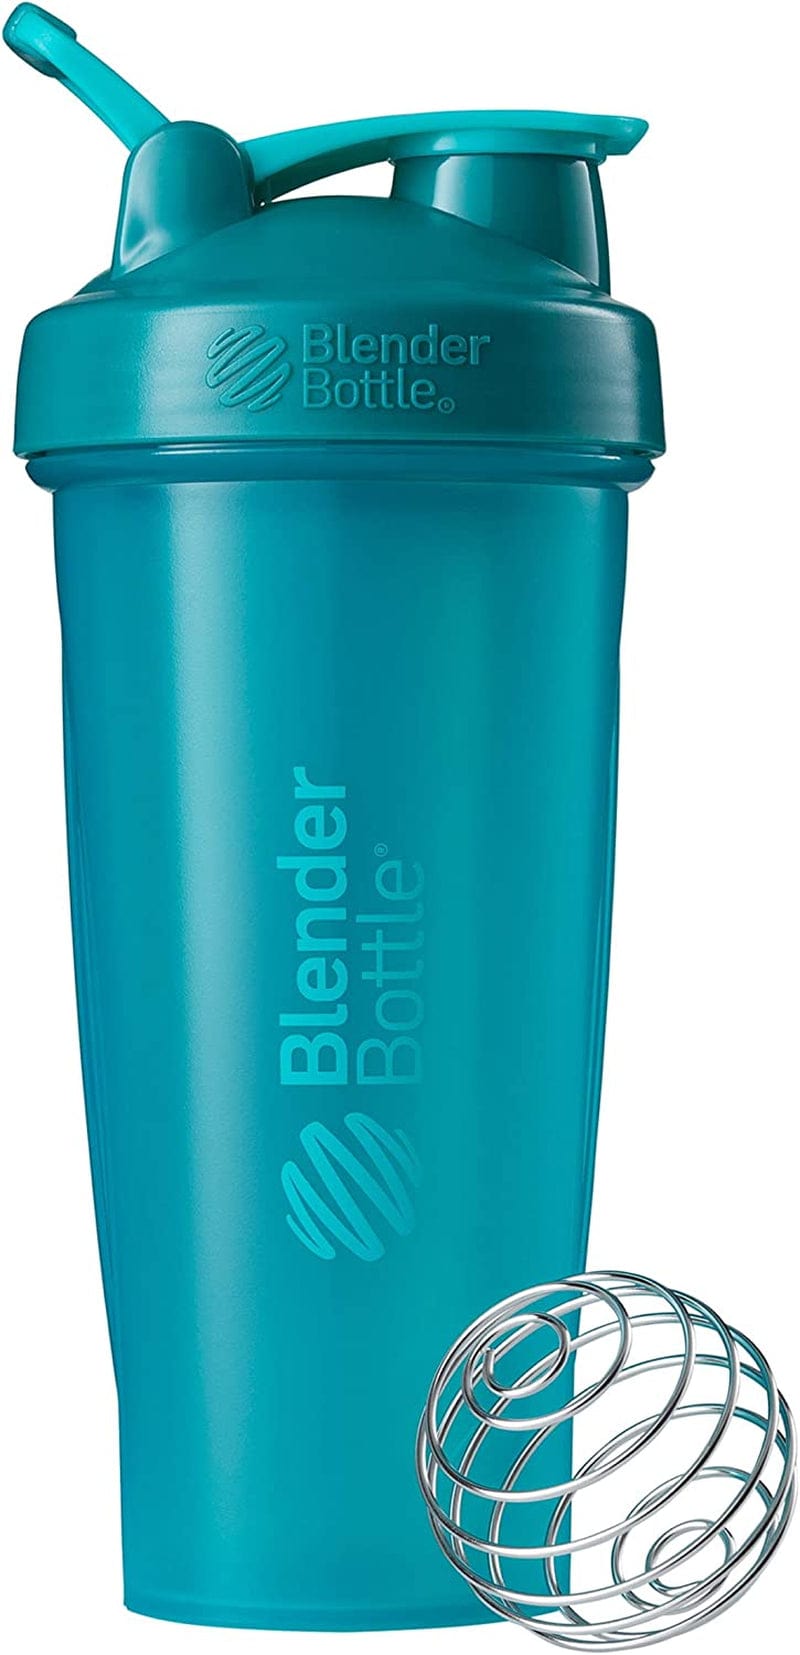 Blenderbottle Classic Shaker Bottle Perfect for Protein Shakes and Pre Workout, 20-Ounce, Clear/Black/Black & Classic V2 Shaker Bottle Perfect for Protein Shakes and Pre Workout, 28-Ounce, Black Home & Garden > Kitchen & Dining > Barware BlenderBottle Teal Bottle 28-Ounce